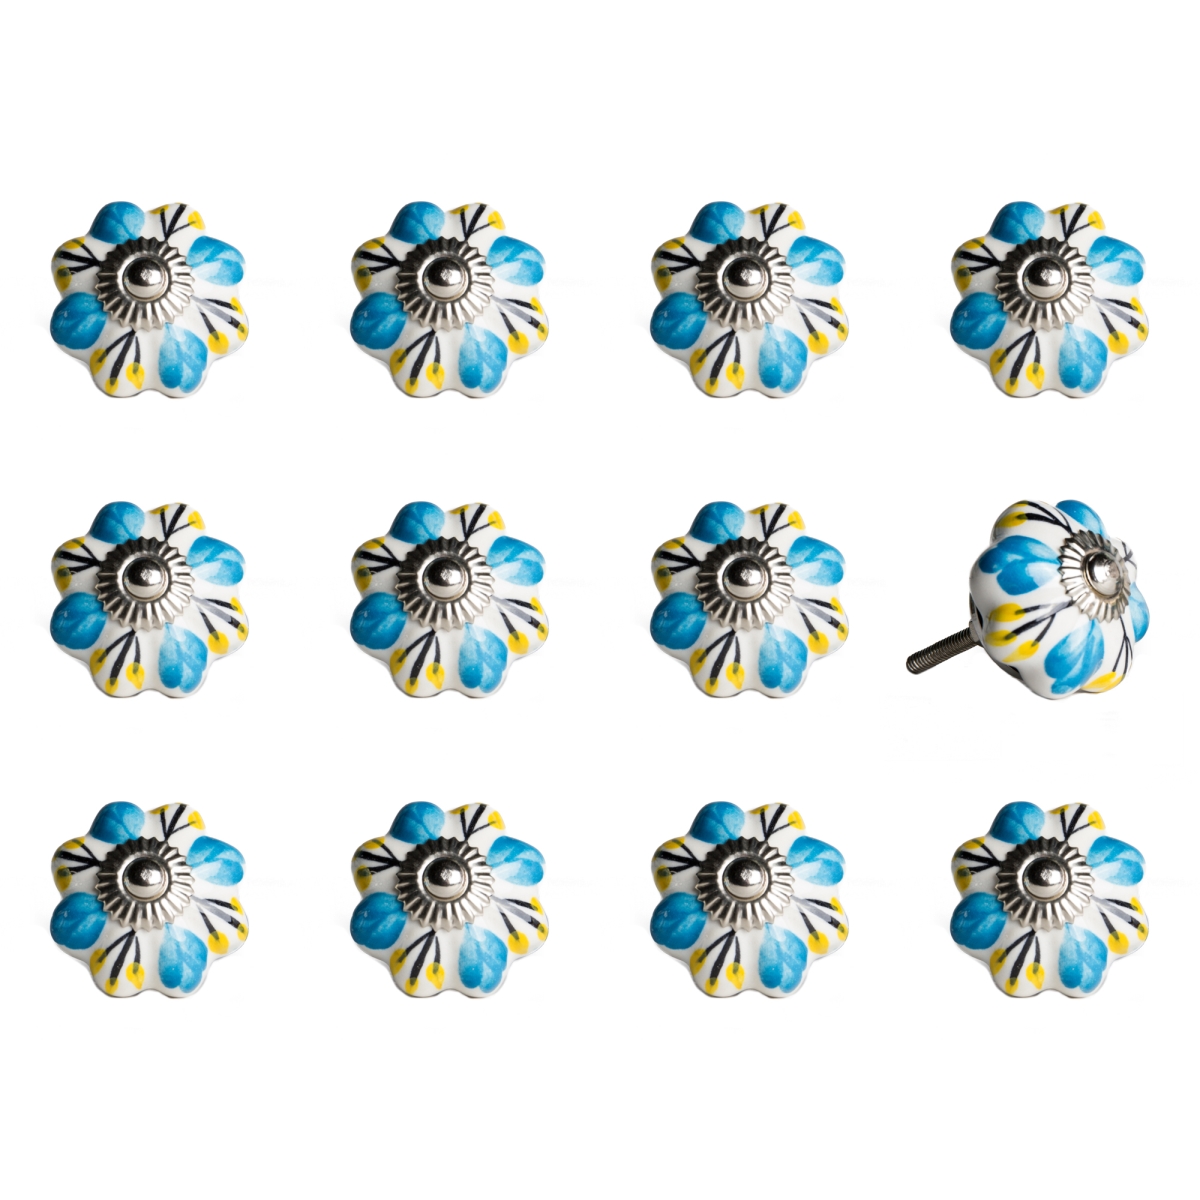 676685045089 Vintage Ceramic Hand Painted Novelty Knob Set - White, Blue & Yellow - Pack Of 12